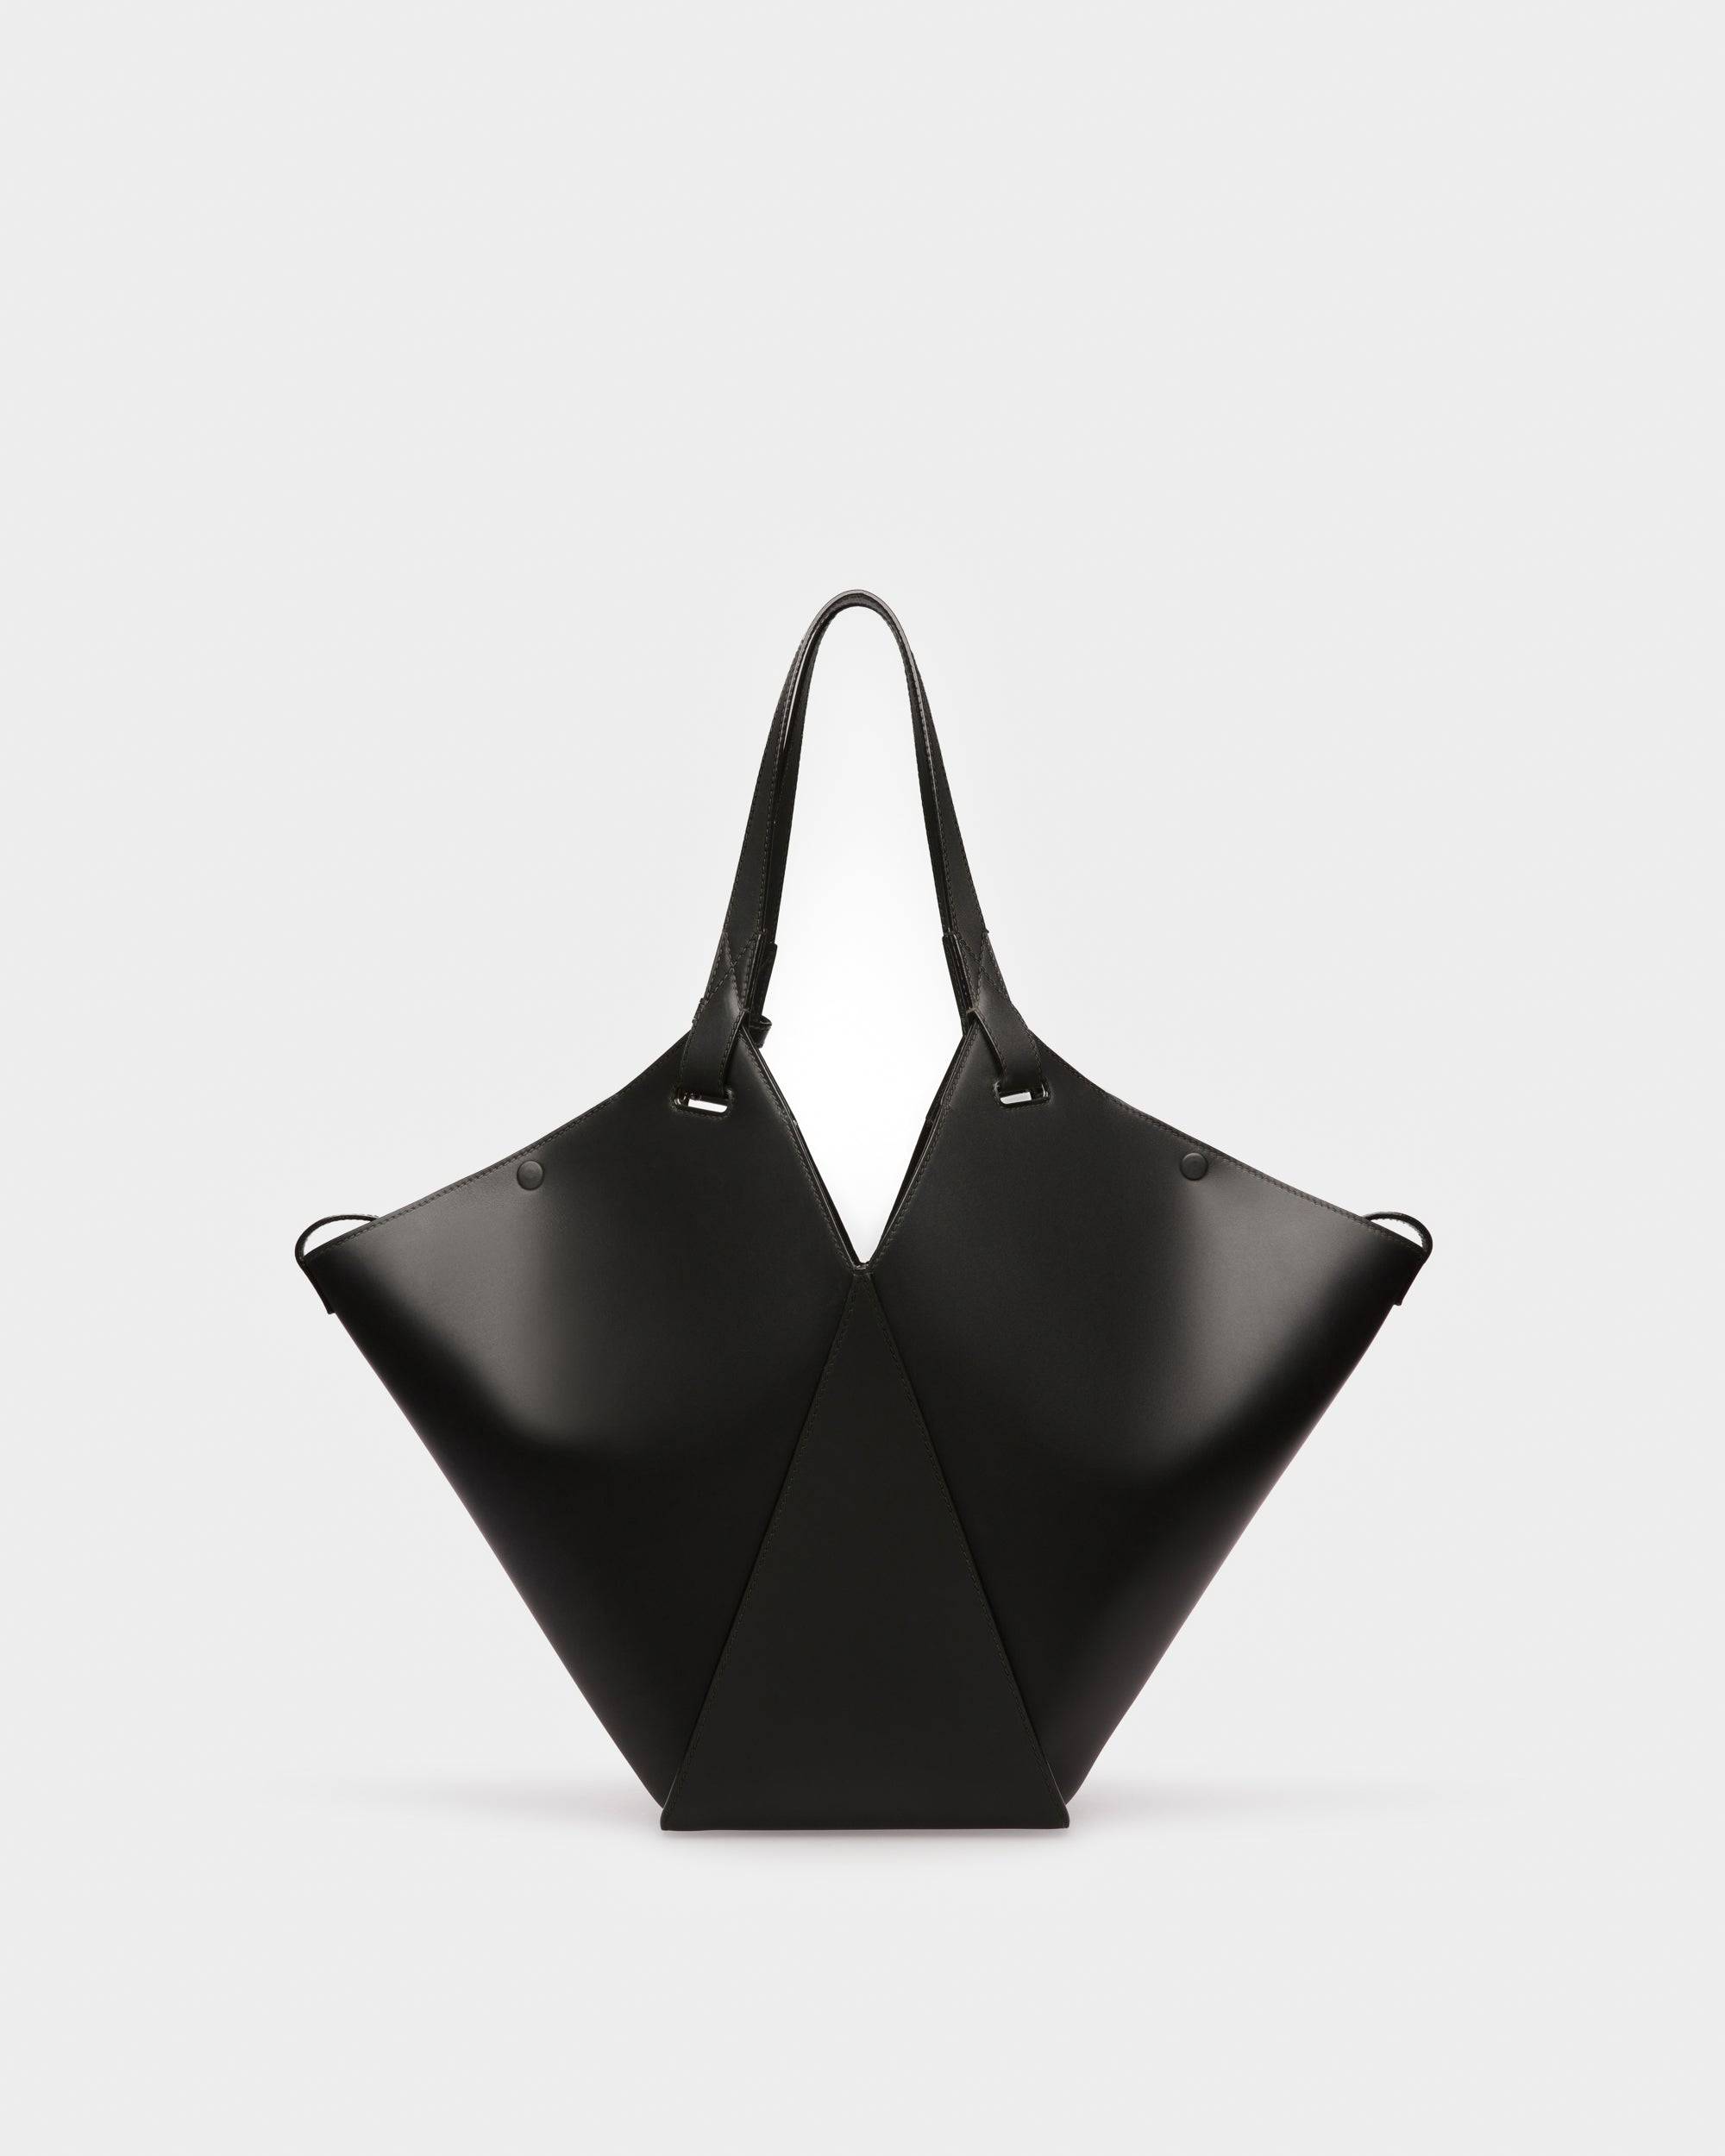 Ahria Tote Bag In Pelle Nera - Bally - 03